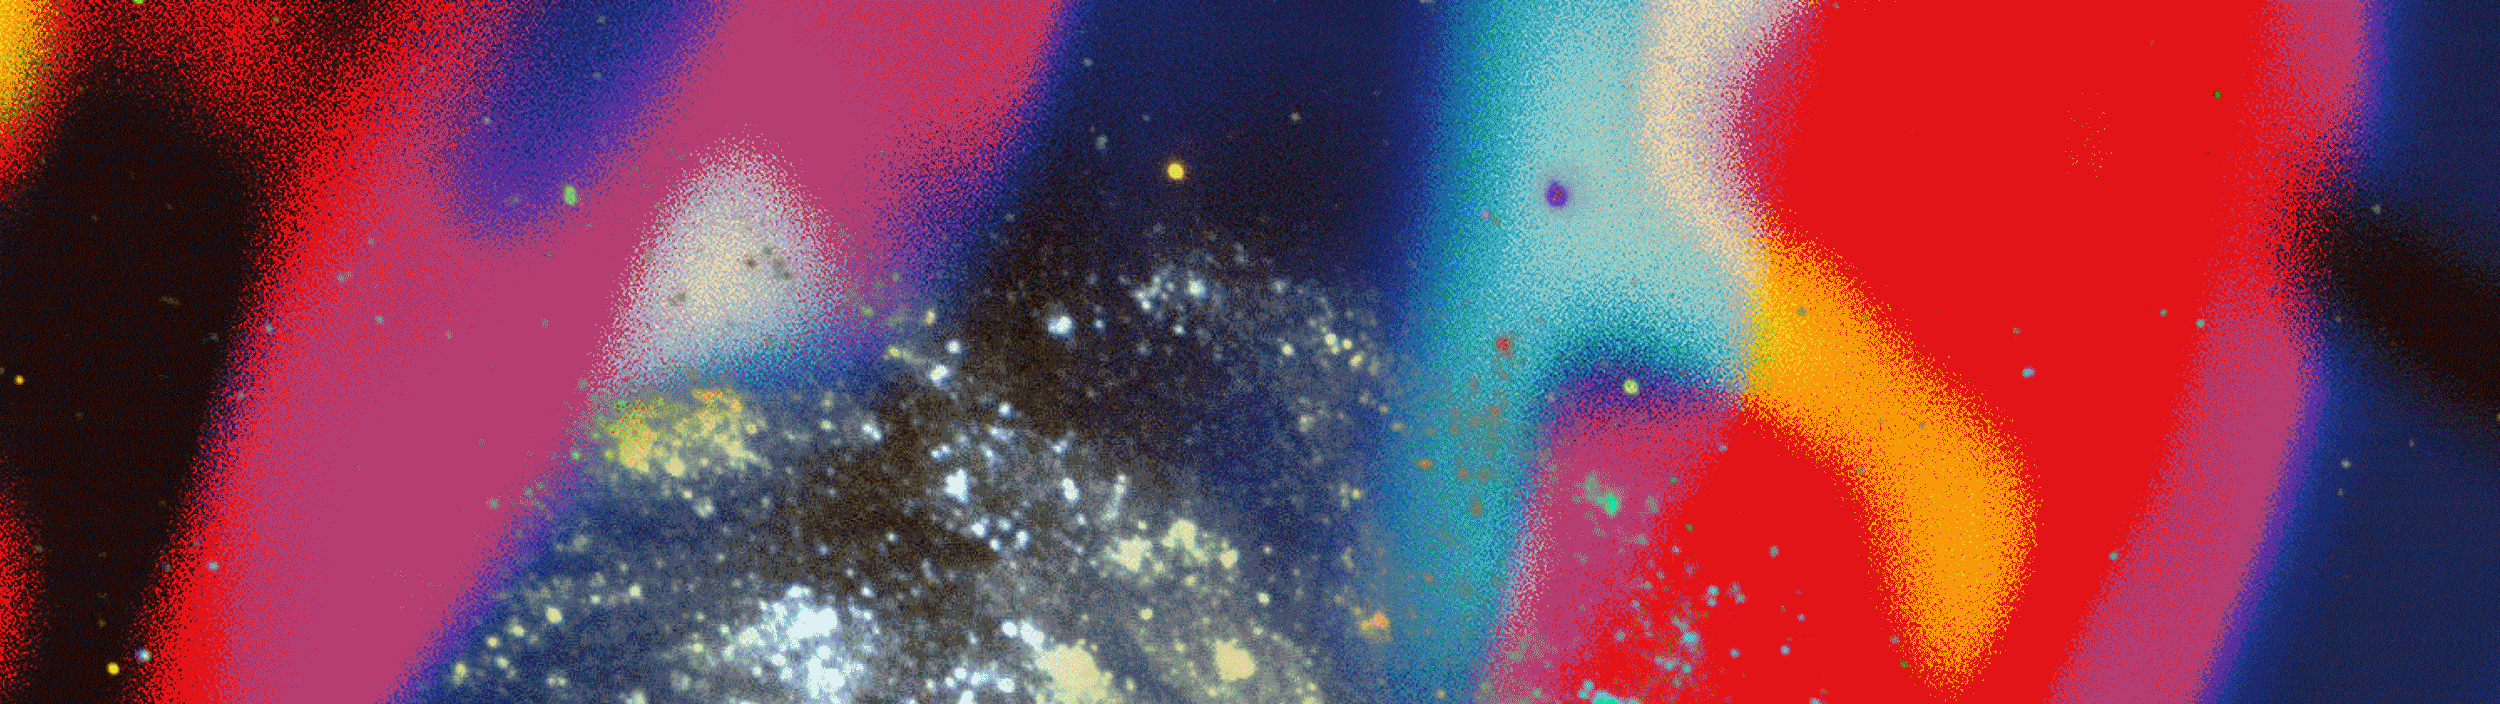 Rebranding case study brand support graphic for Parallel as a Gif. Vintage-feeling space backgrounds are overlaid with a colourful primary-colour style gradient with blobby shapes.